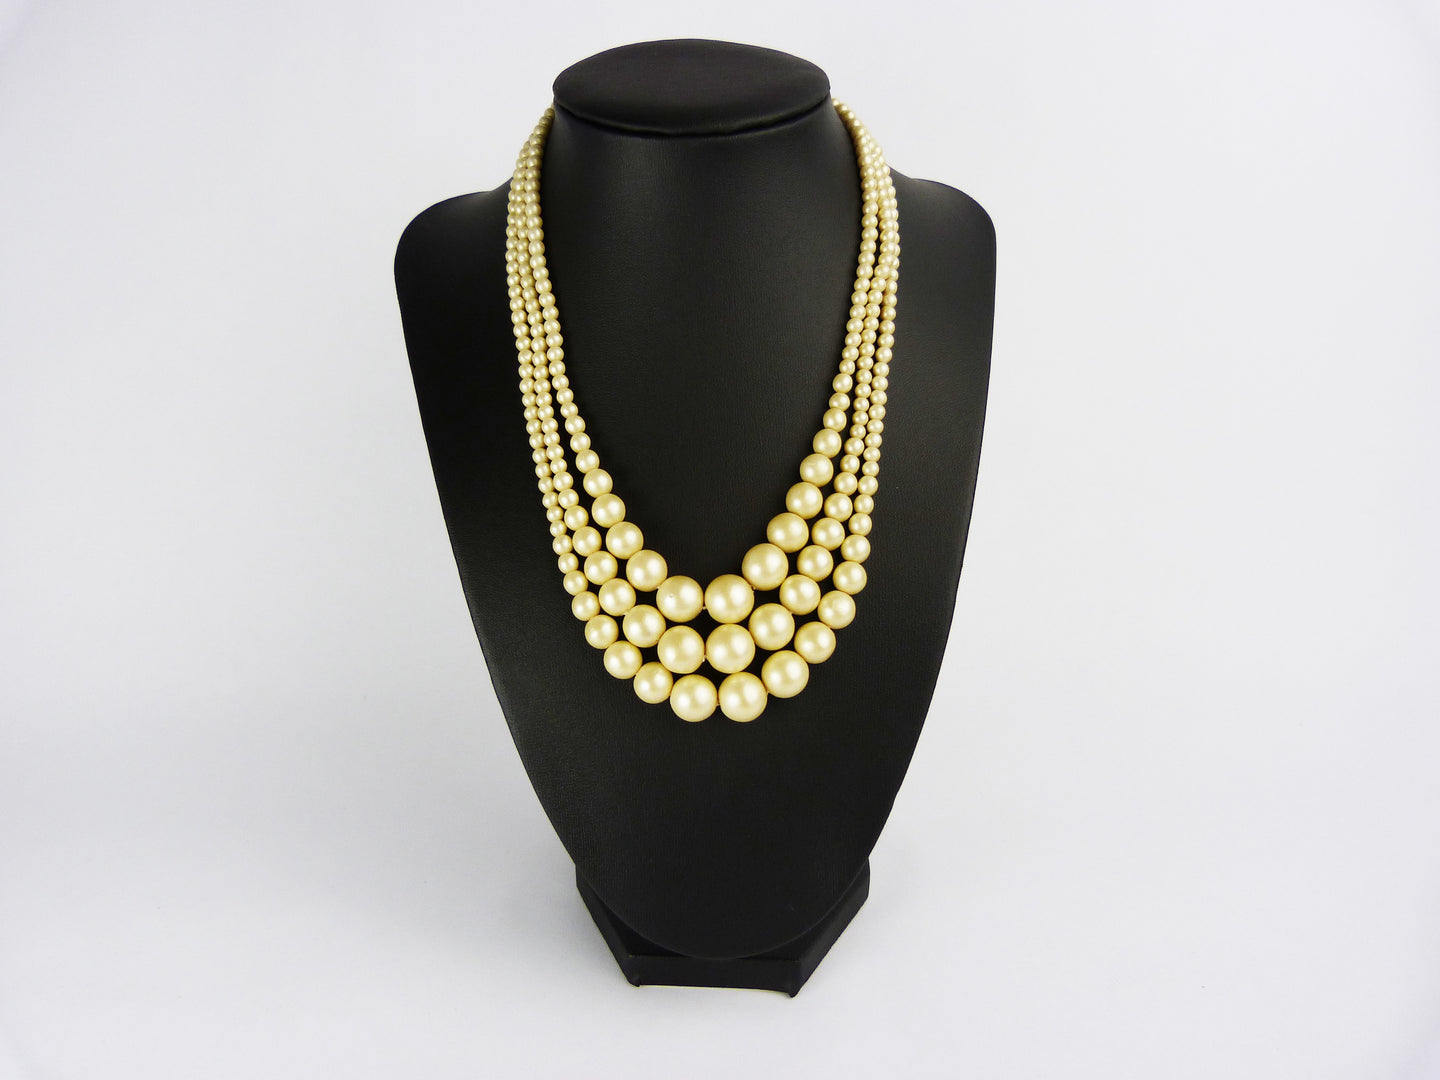 Vintage Multi-Strand Faux Pearl Necklace - Triple Strand Pearl Bead Wedding Bridal Necklace